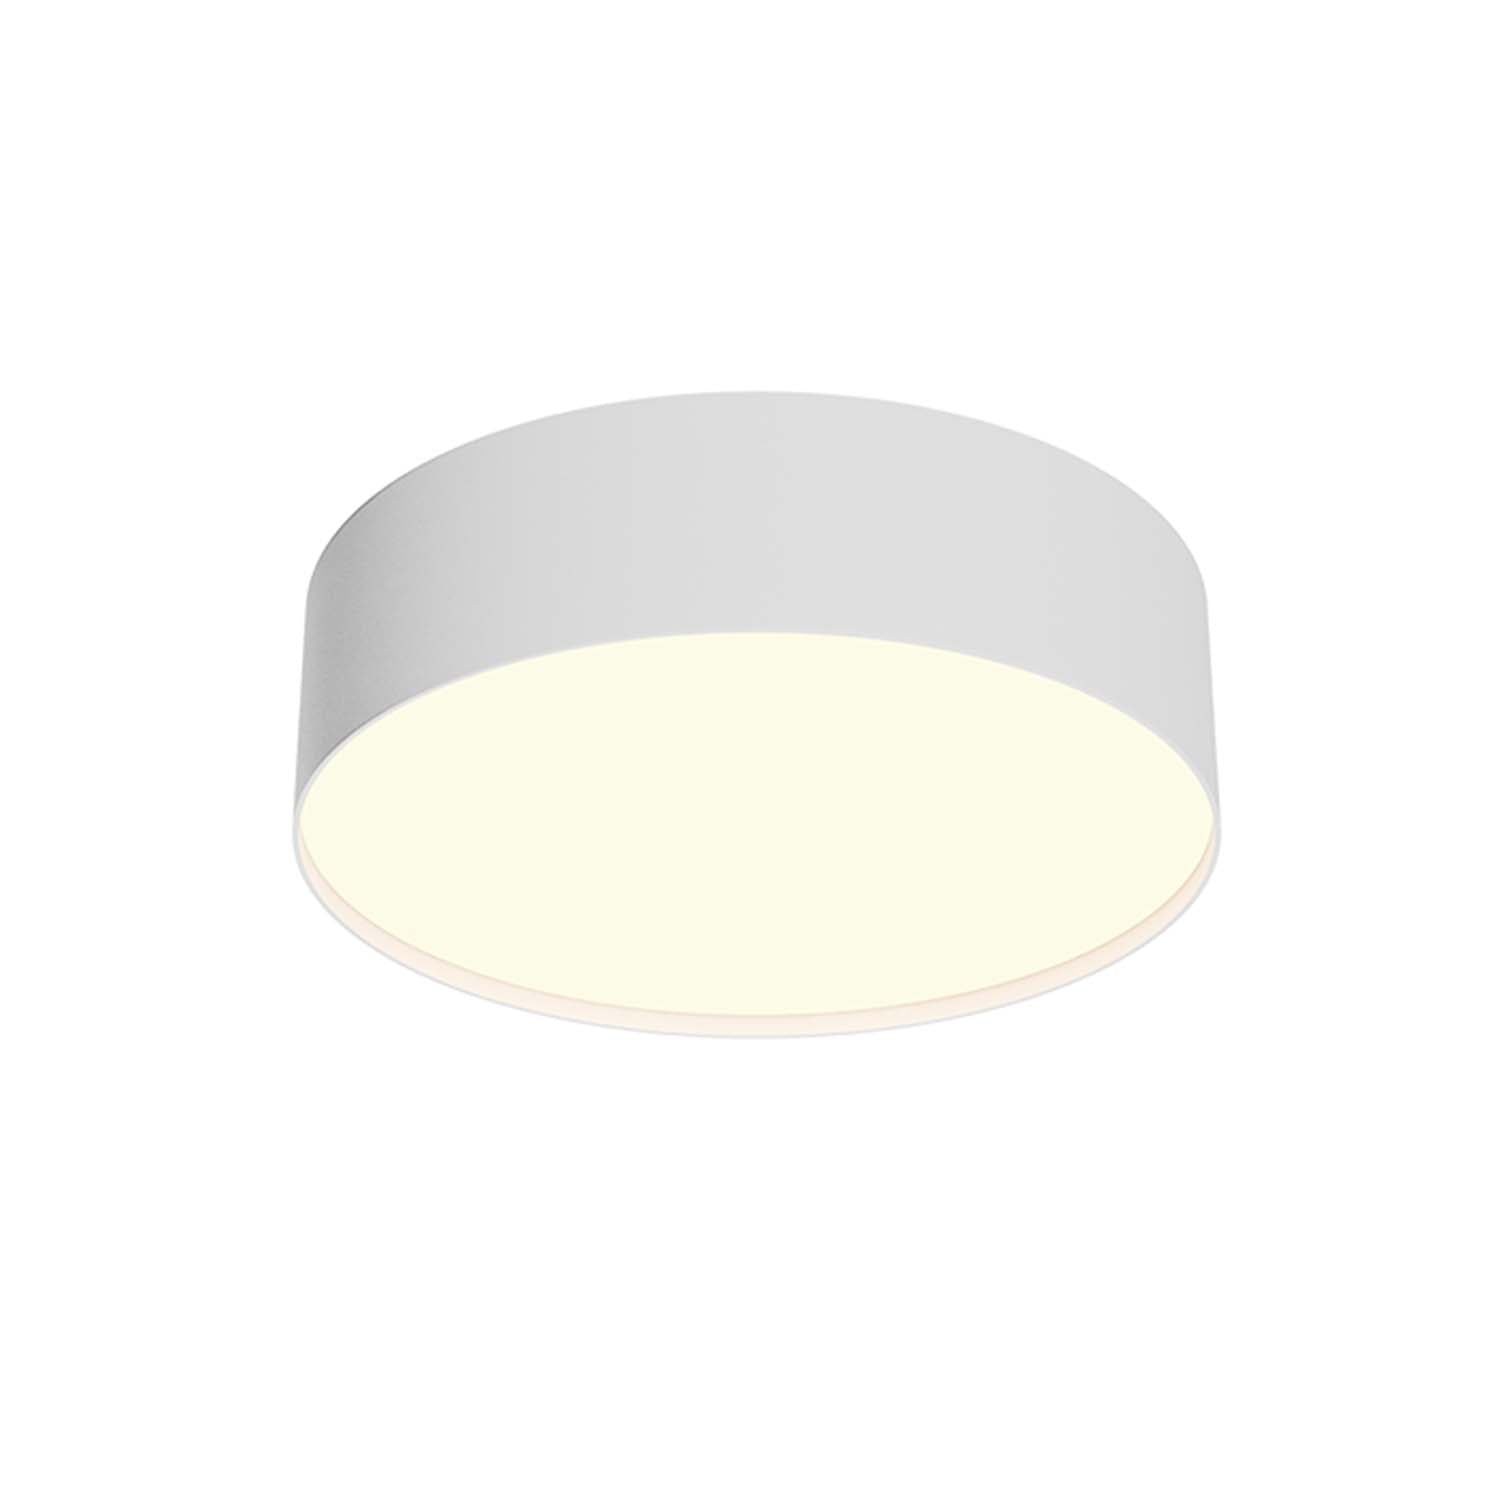 ZON - Designer and minimalist integrated LED ceiling light